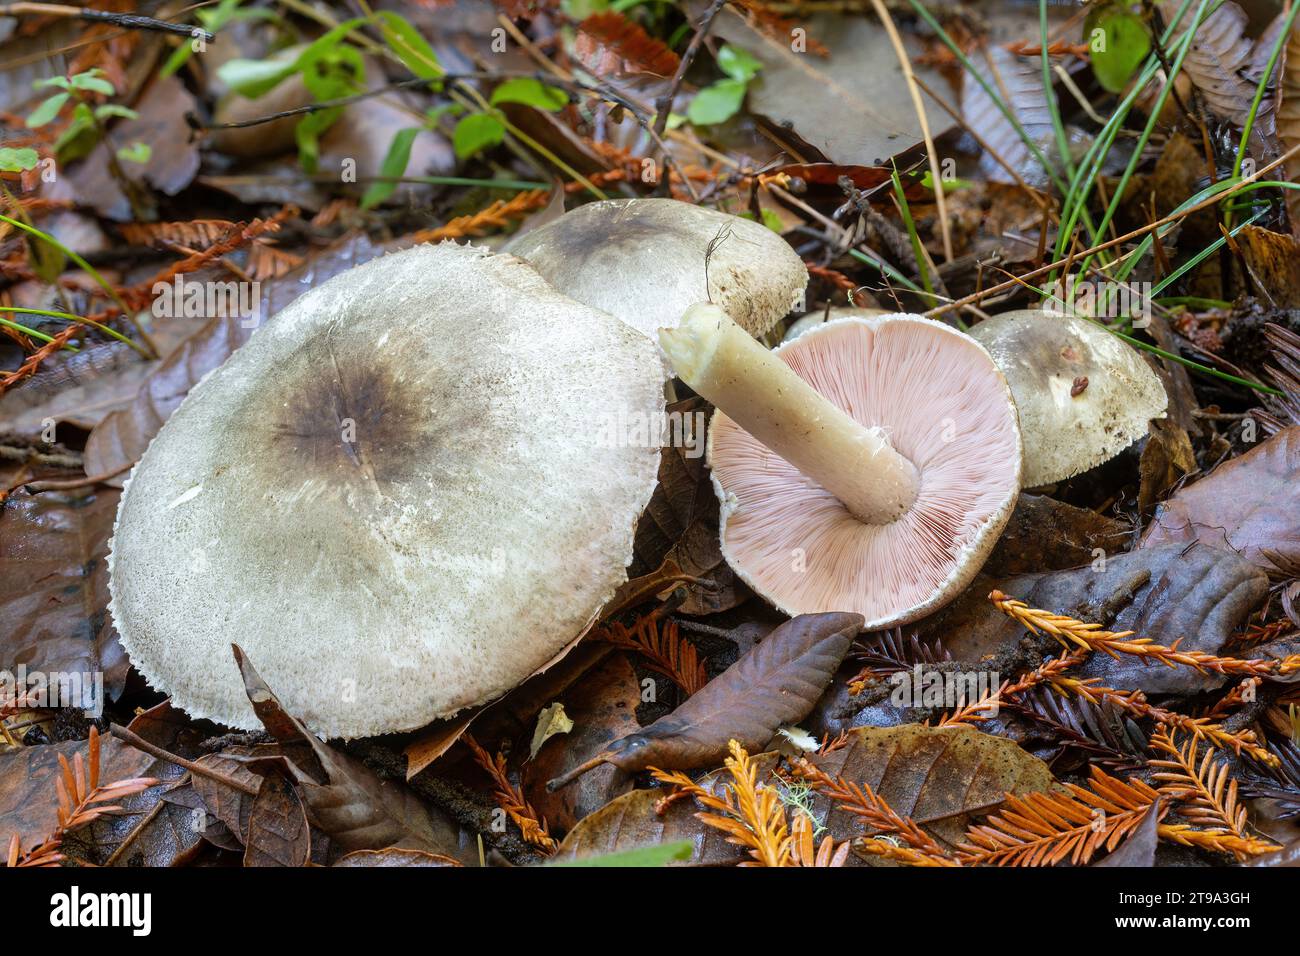 Agaricus, a genus of mushrooms that includes both edible and poisonous species. Santa Cruz Mountains, California. Stock Photo